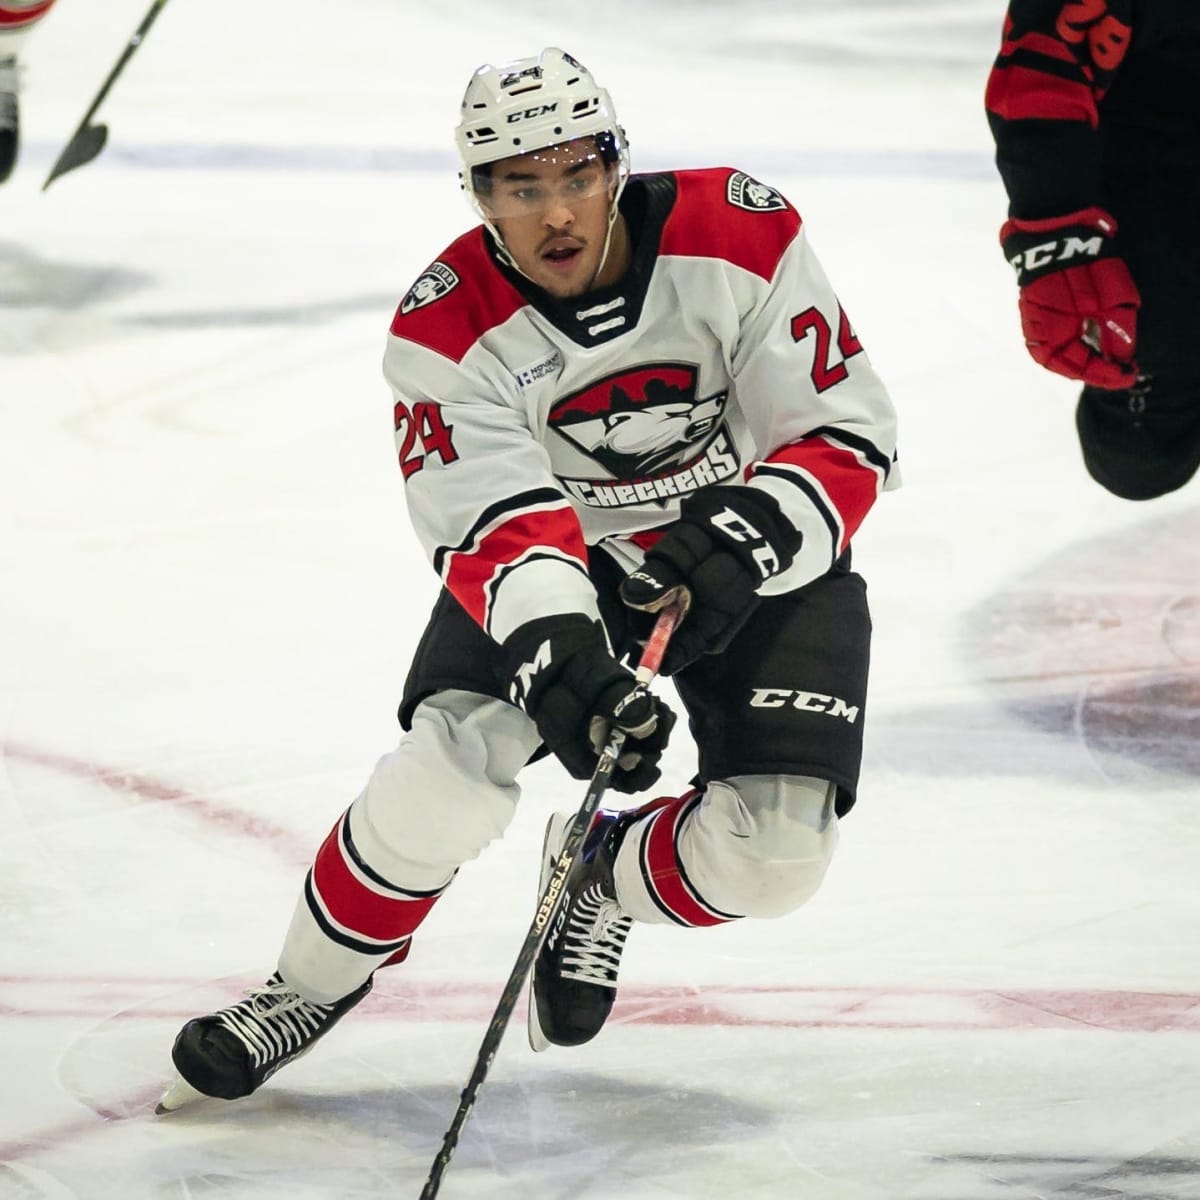 The Charlotte Checkers professional ice hockey franchise